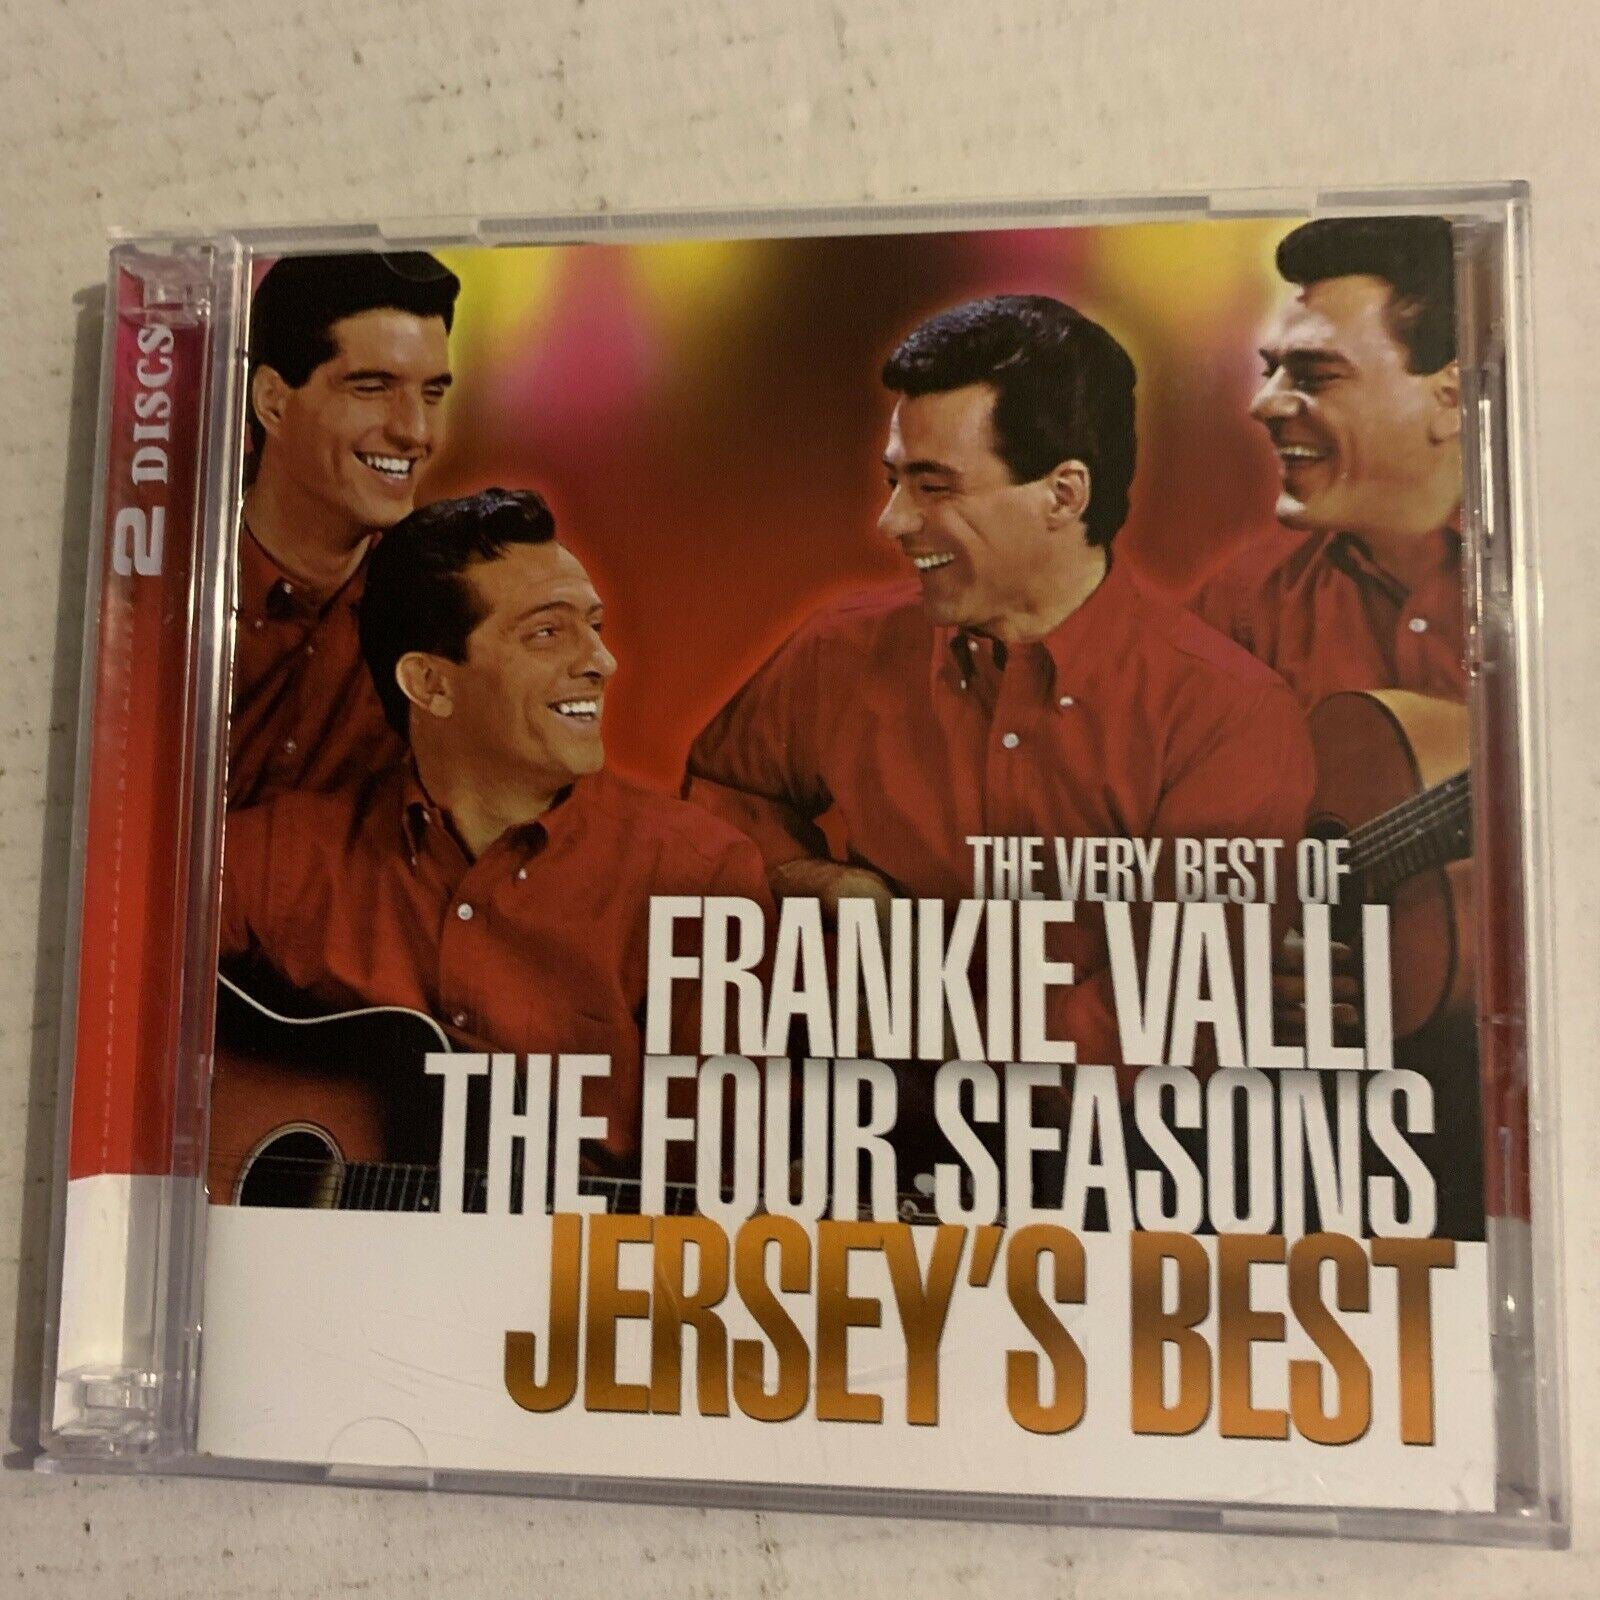 Jersey Beat: The Music of Frankie Valli & the Four Seasons by